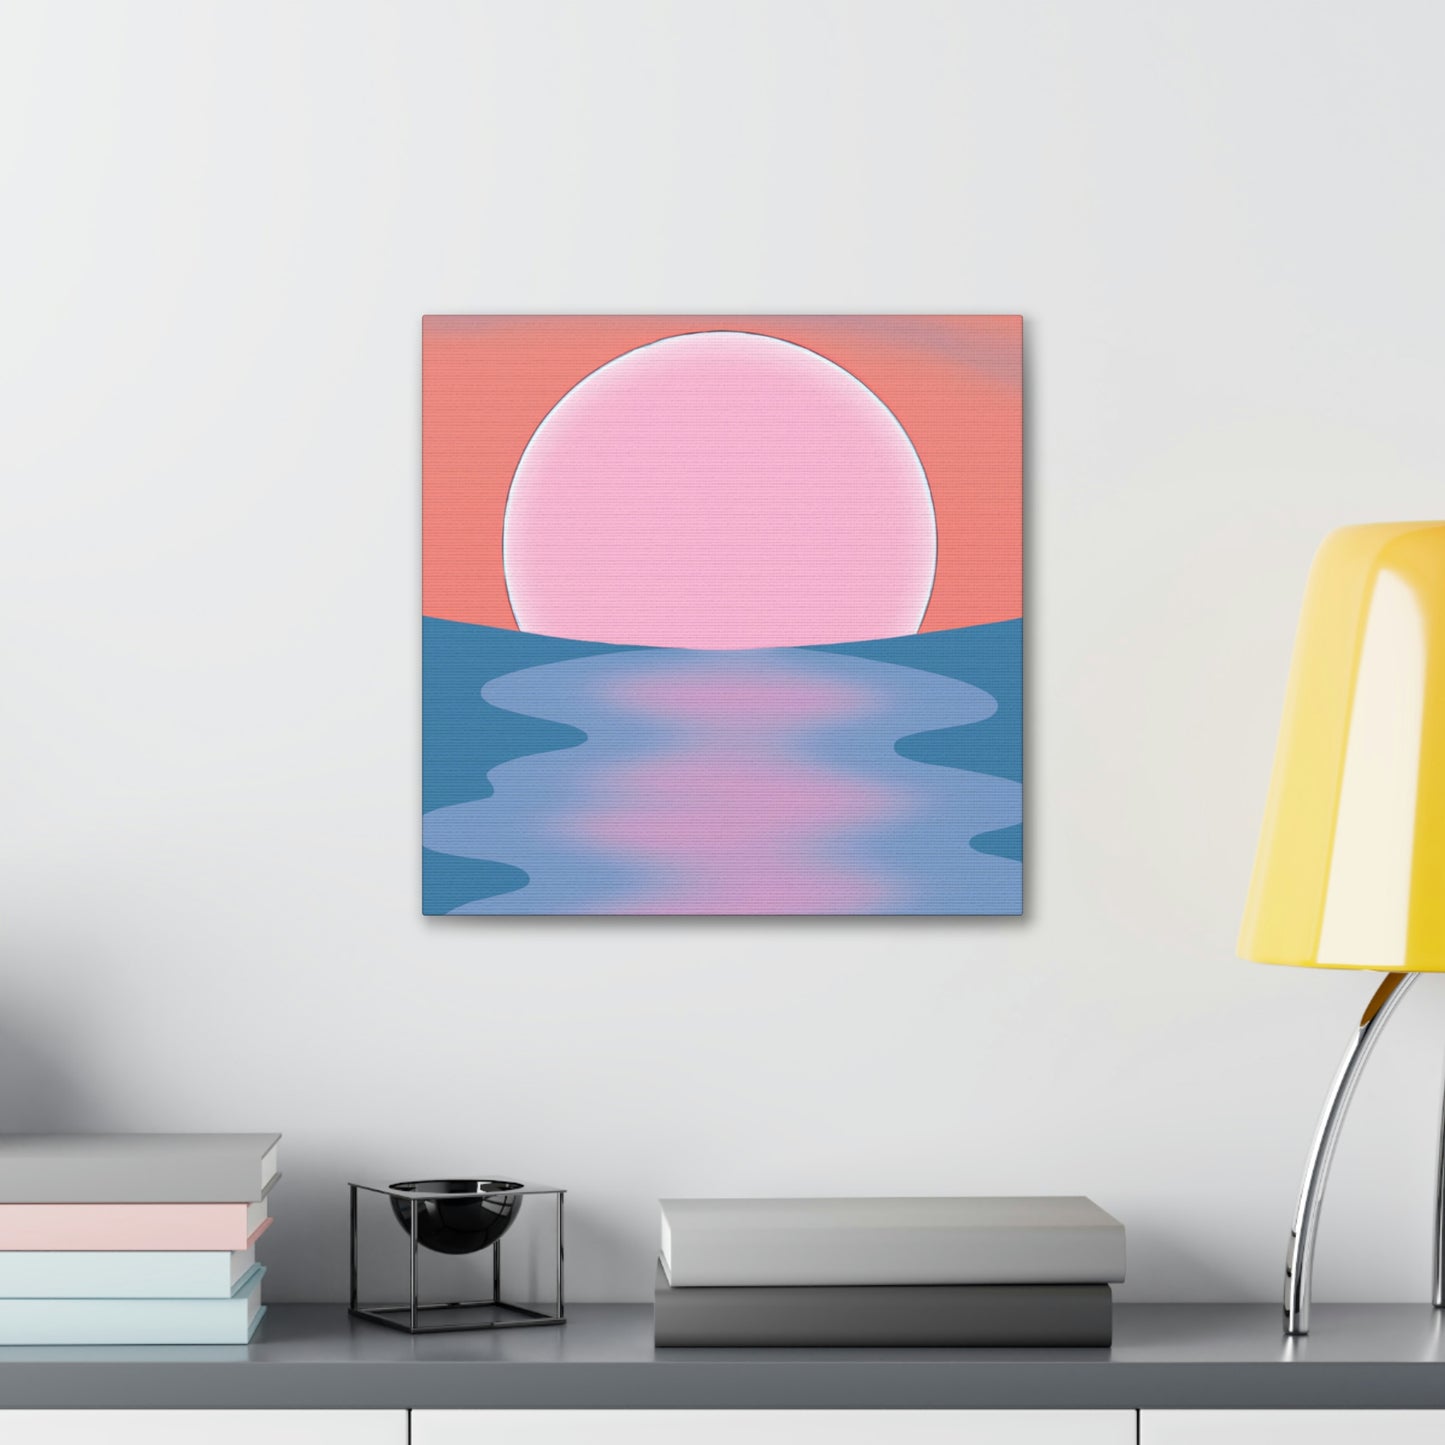 "Serenity at Sunset" - The Alien Canva